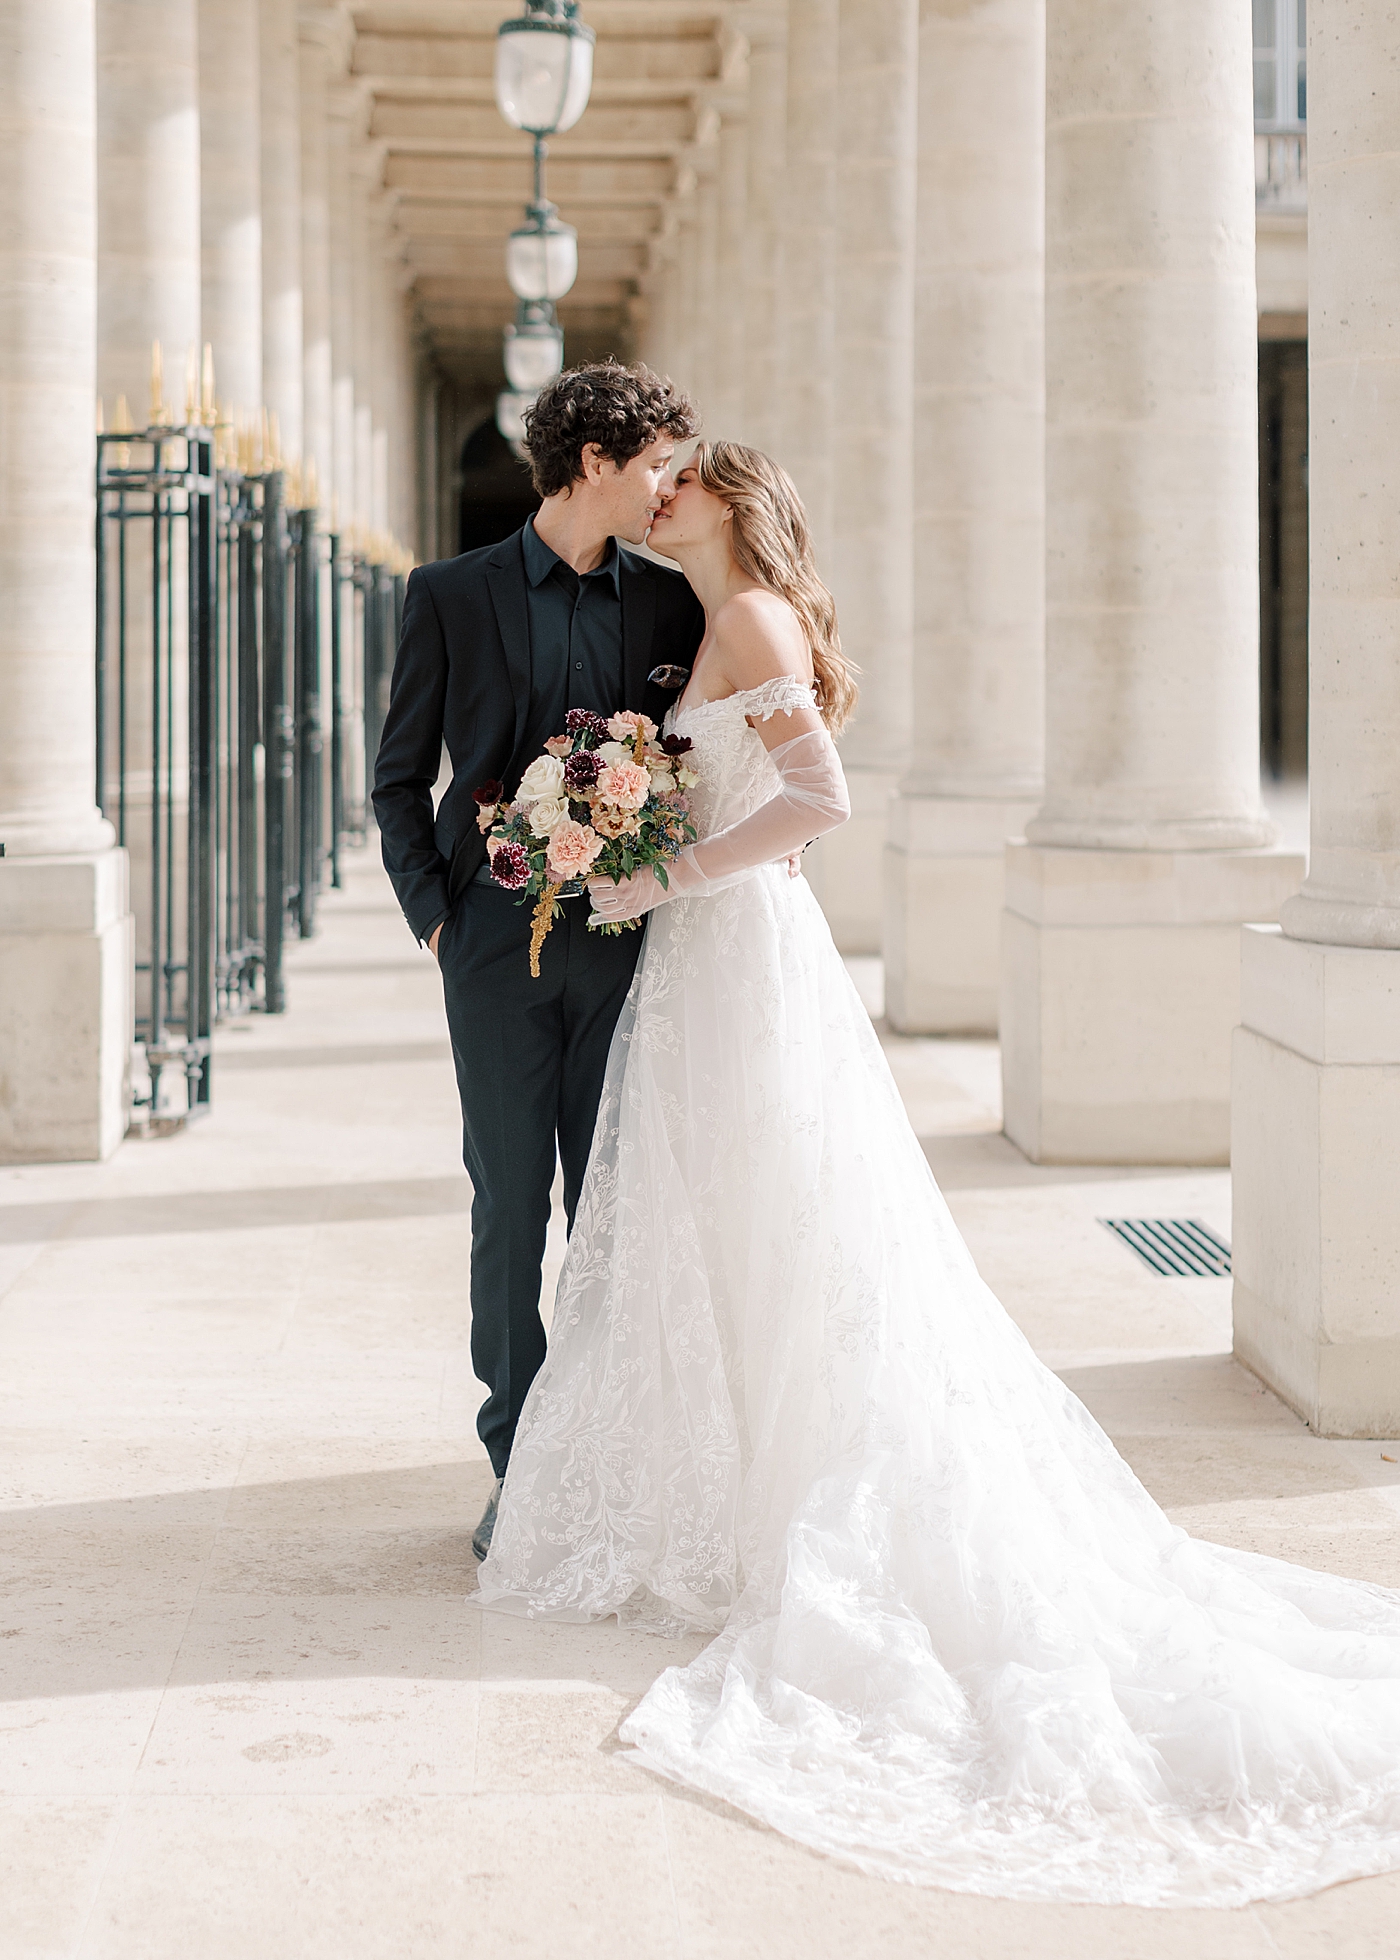 Image of a bride and groom embracing and kissing in an outdoor, sunlit, concrete corridor | Image by Hope Helmuth Photography